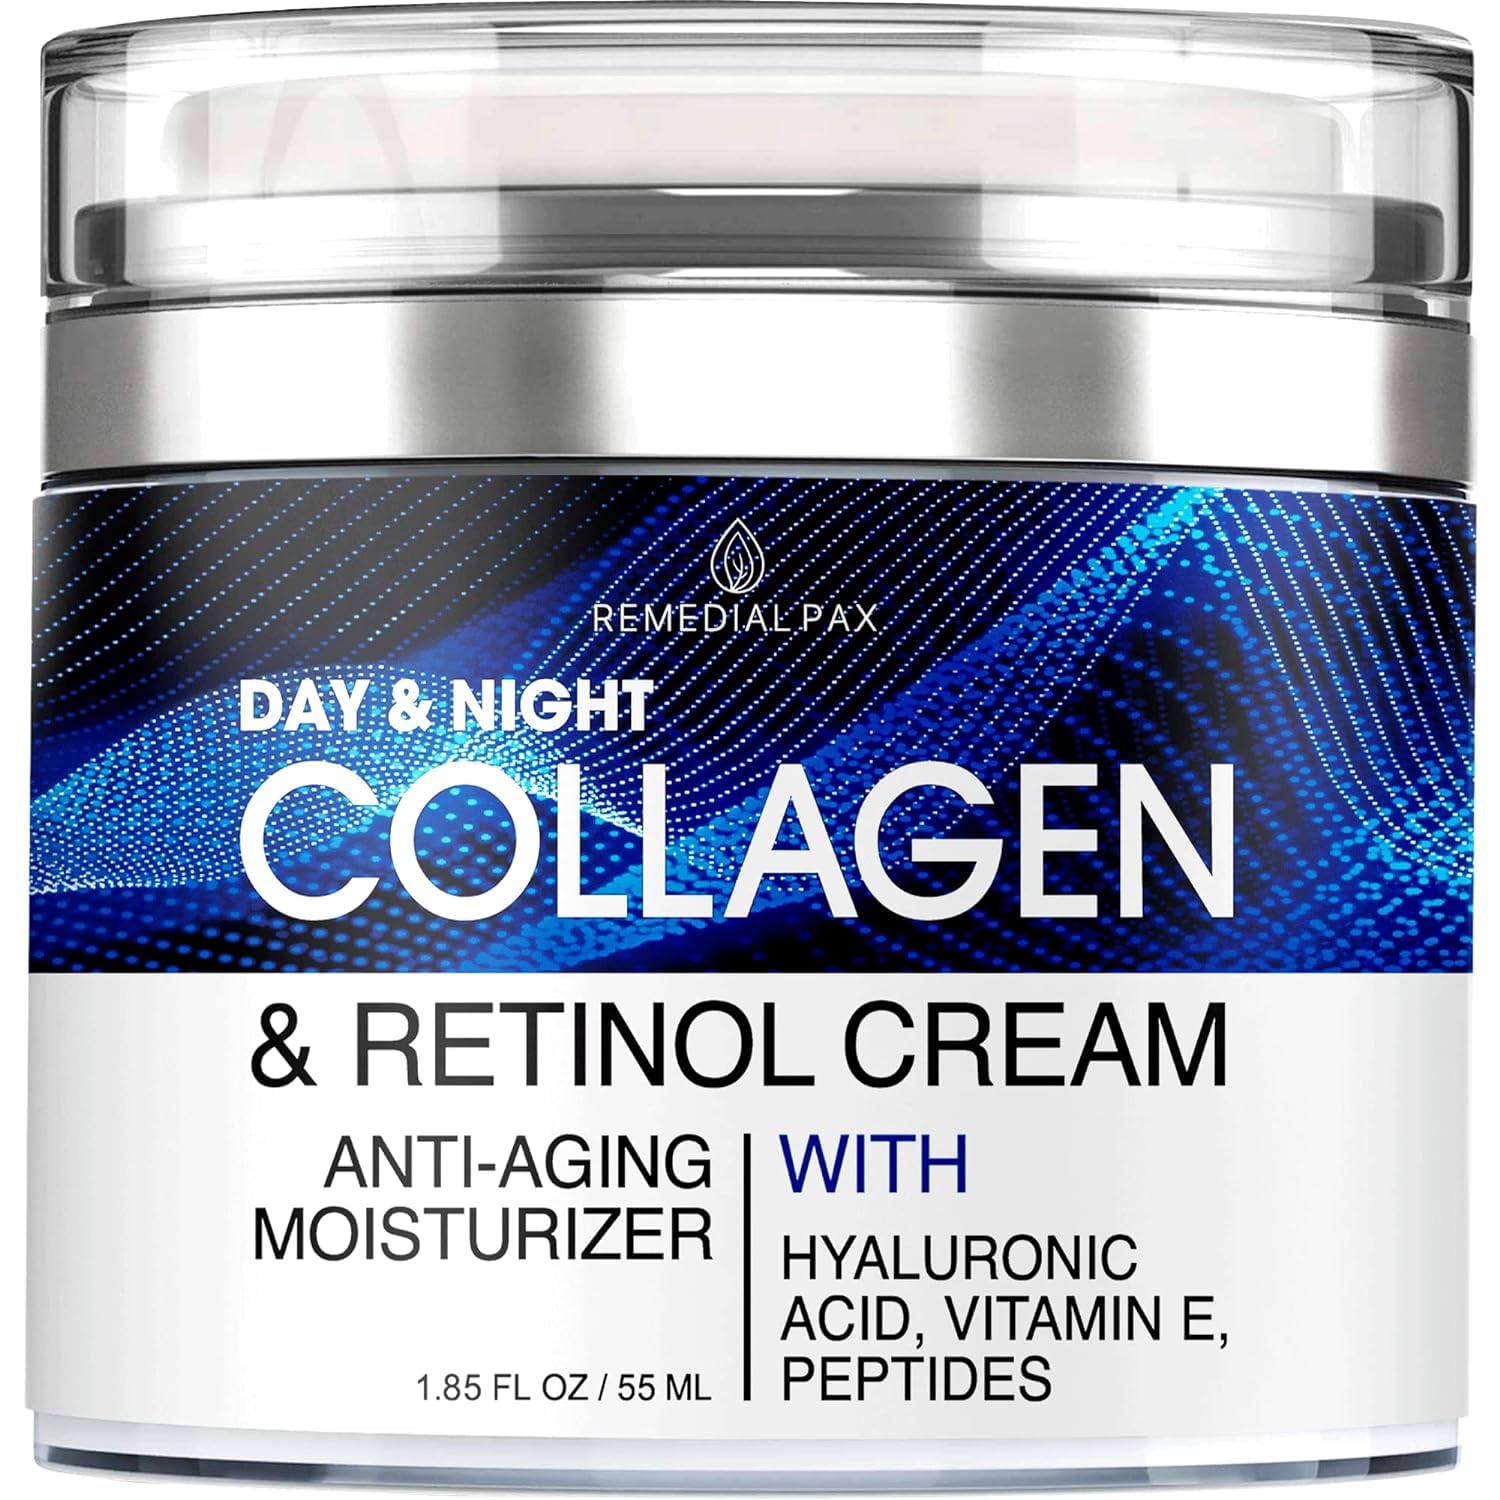 Collagen Cream for Face with Retinol and Hyaluronic Acid, Day Night Anti Aging Skincare Facial Moist